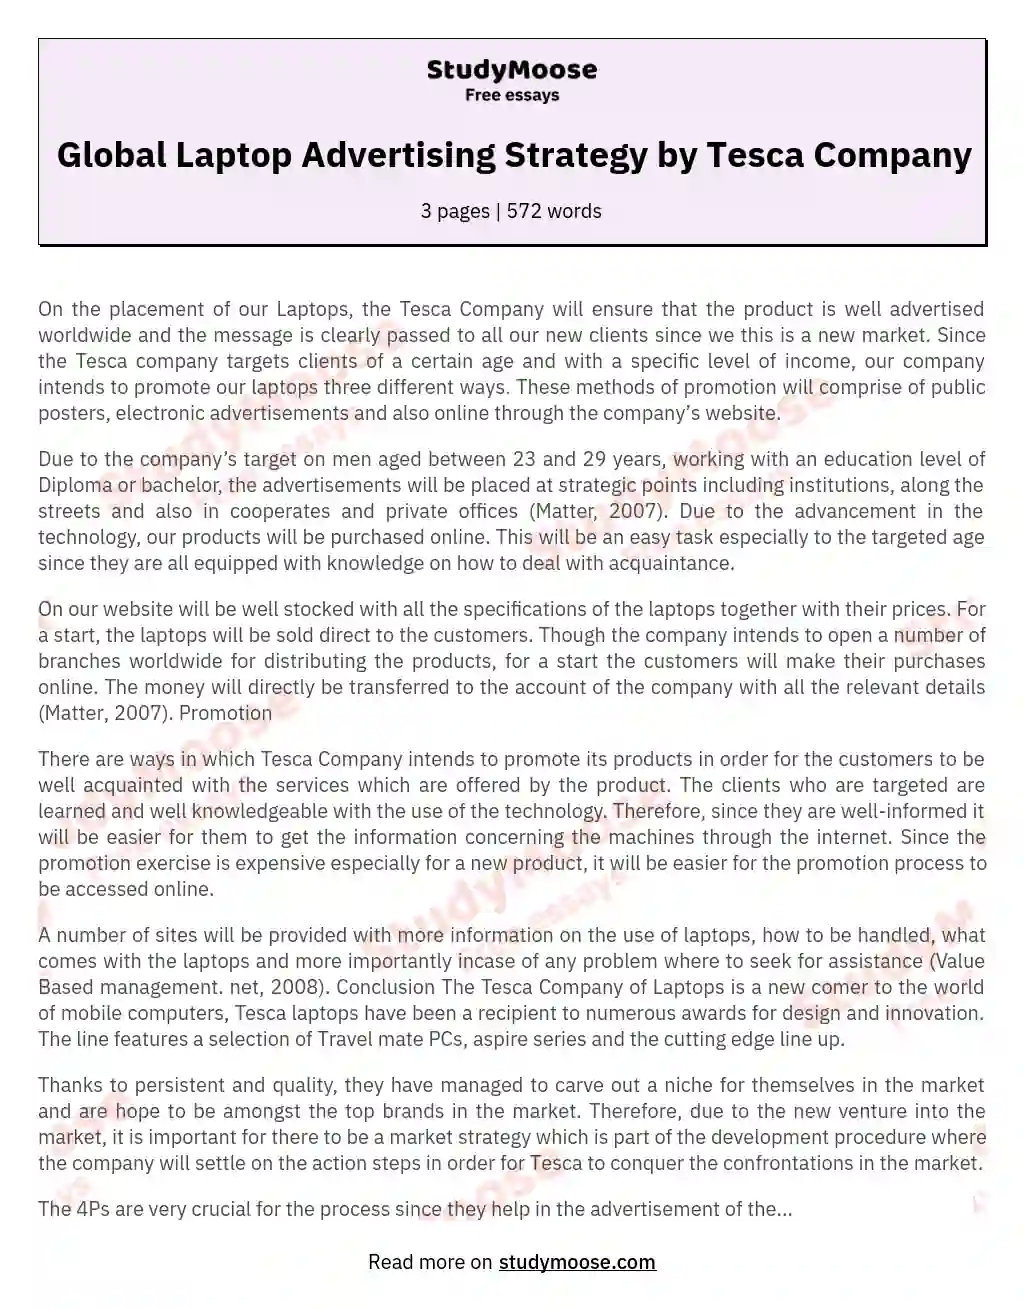 Global Laptop Advertising Strategy by Tesca Company essay